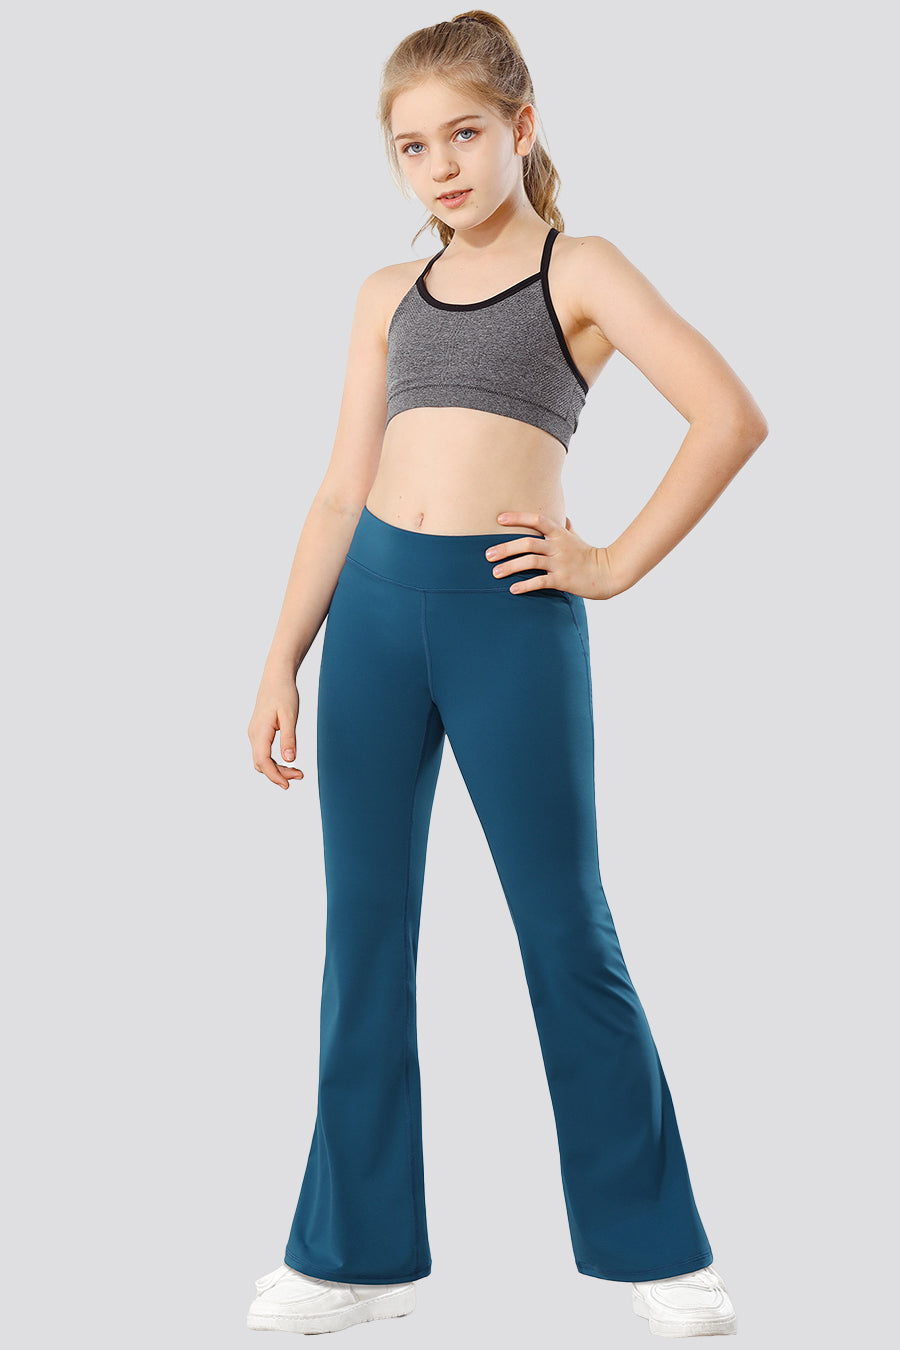 cute workout clothes – a lonestar state of southern